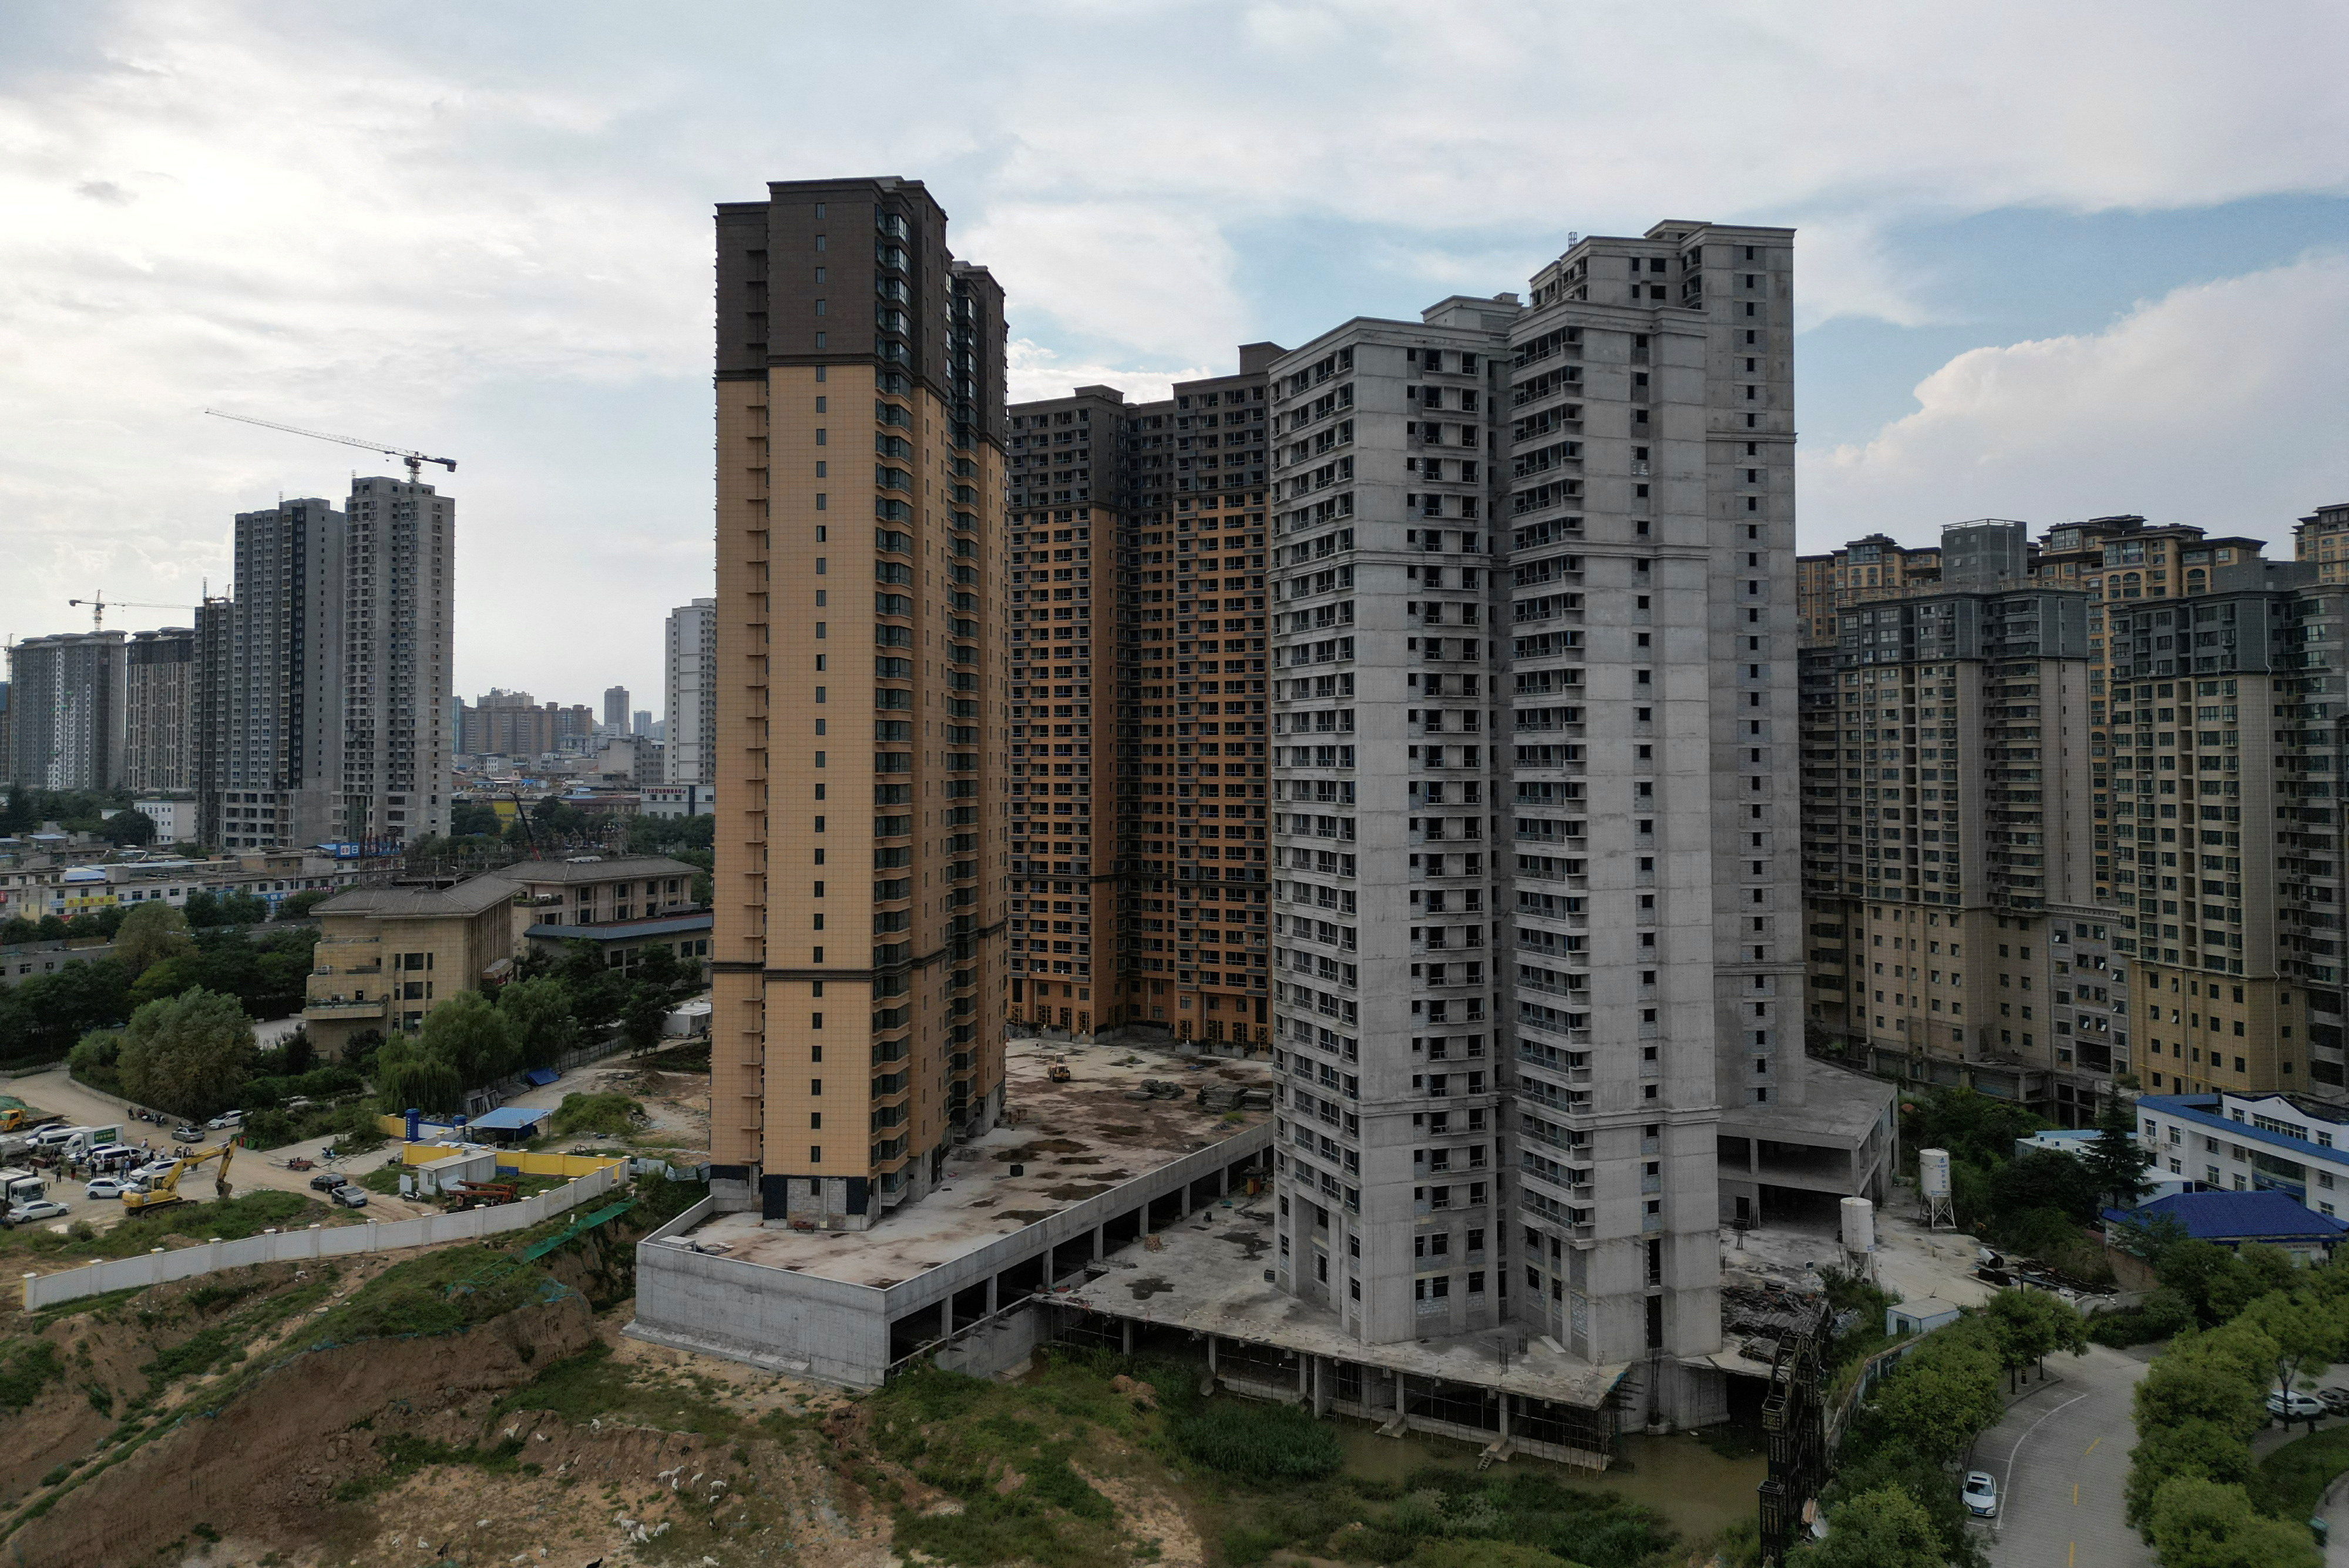 Aerial view shows unfinished residential buildings of the Gaotie Wellness City complex in Tongchuan